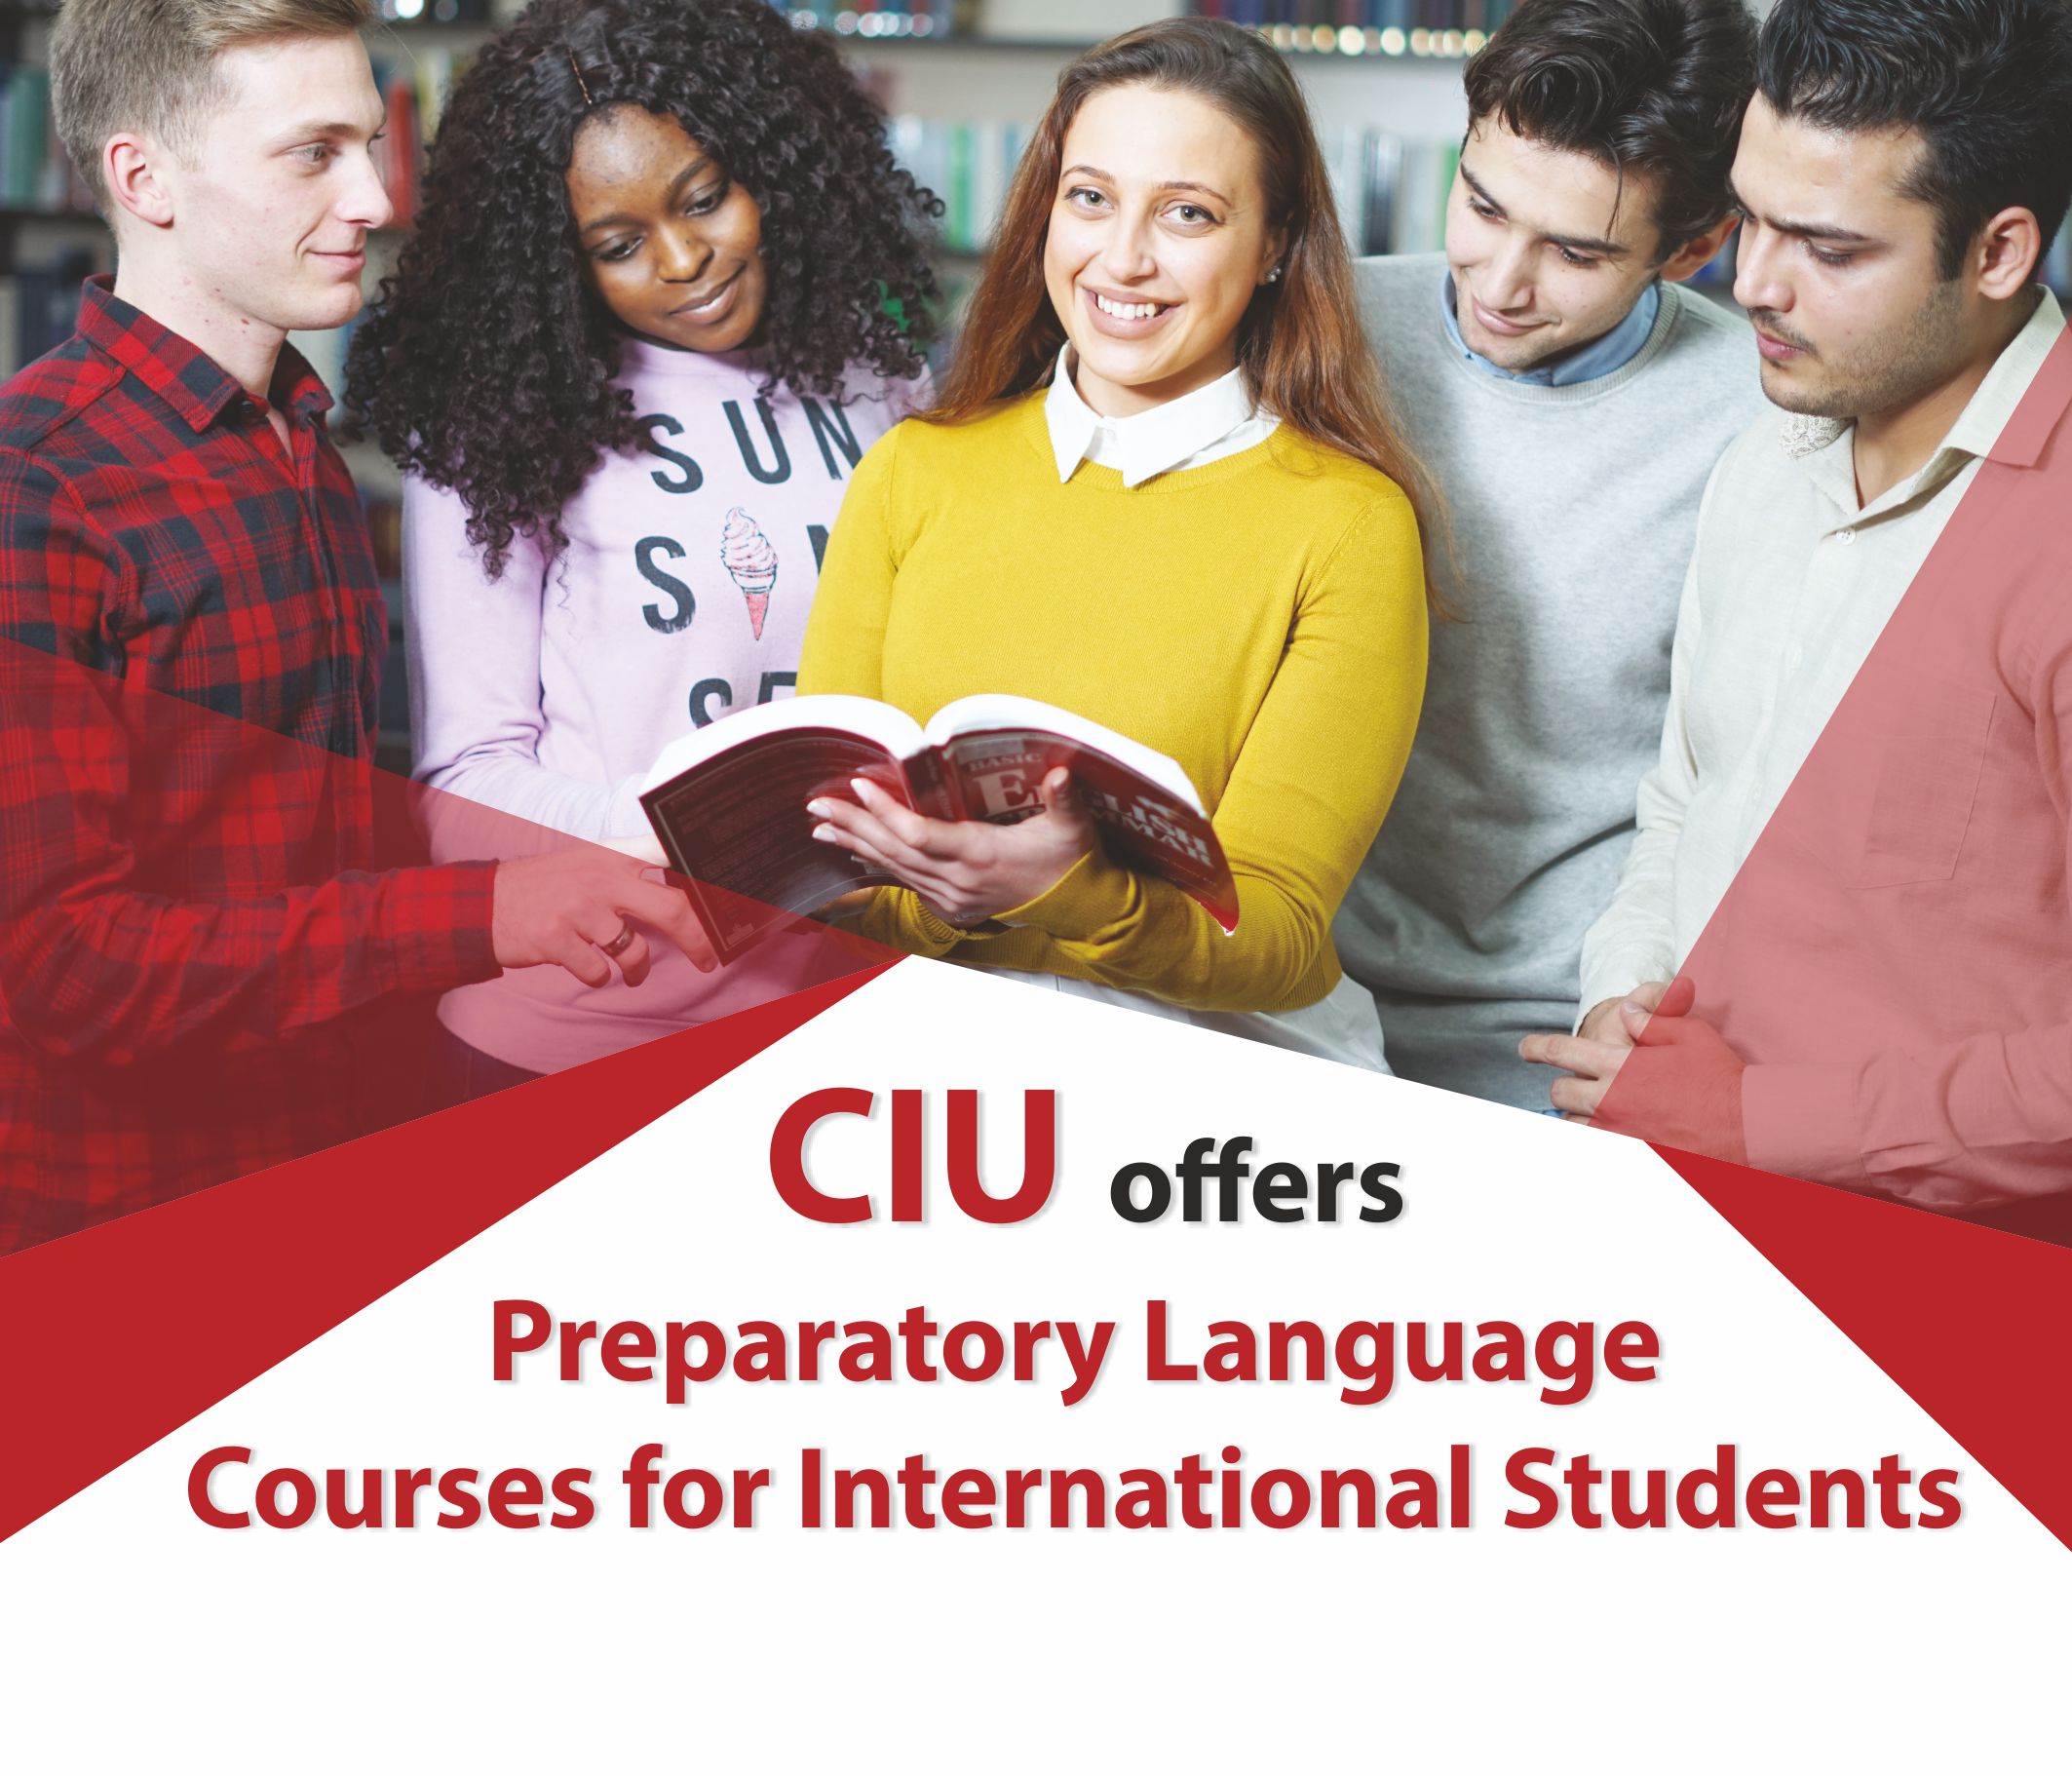 English preparatory course for international students